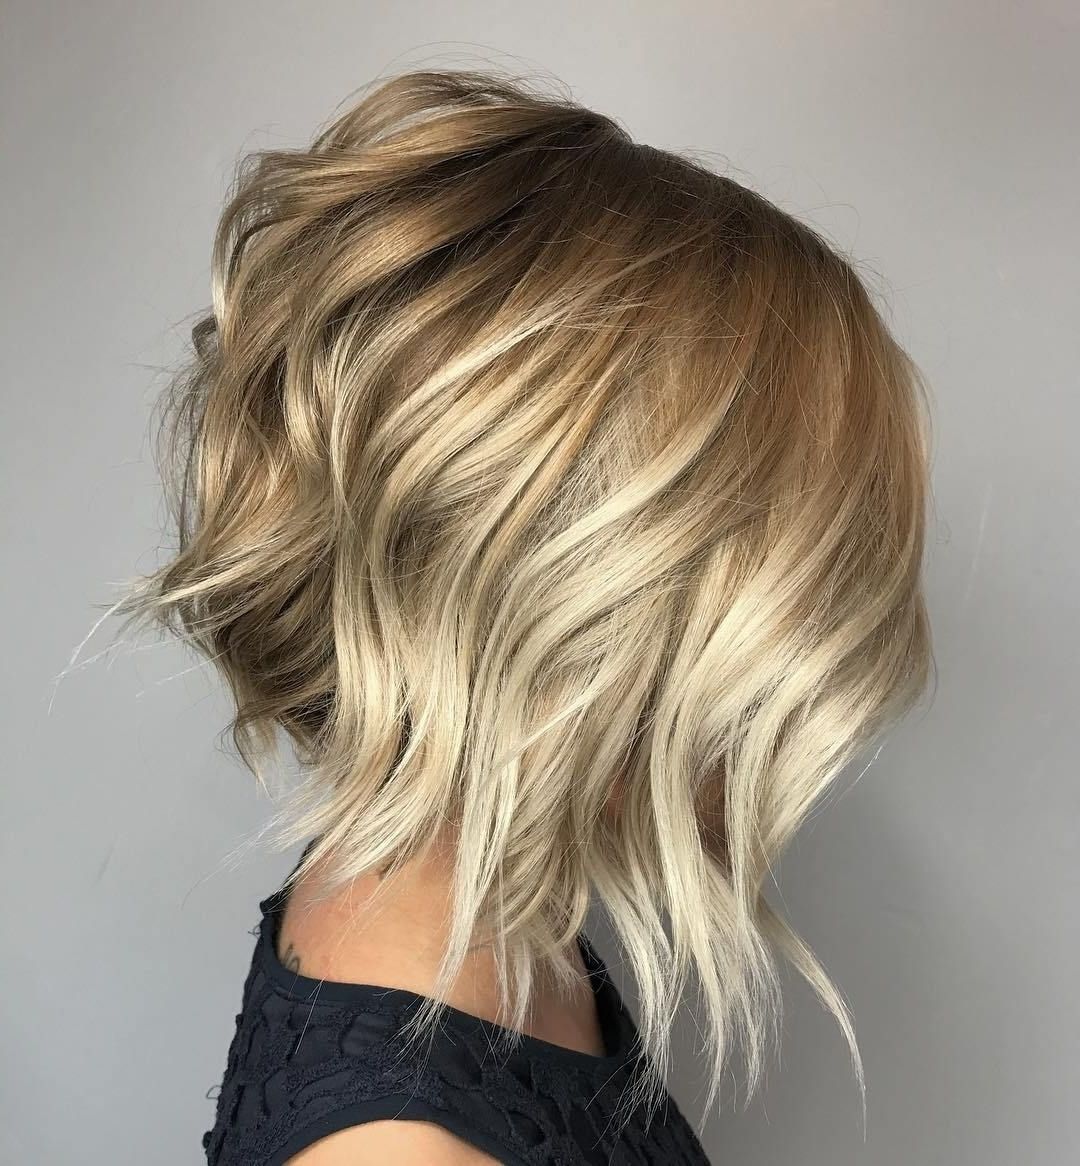 Blondes, Blonde Bobs And Bobs Within Current Chamomile Blonde Lob Hairstyles (View 1 of 20)